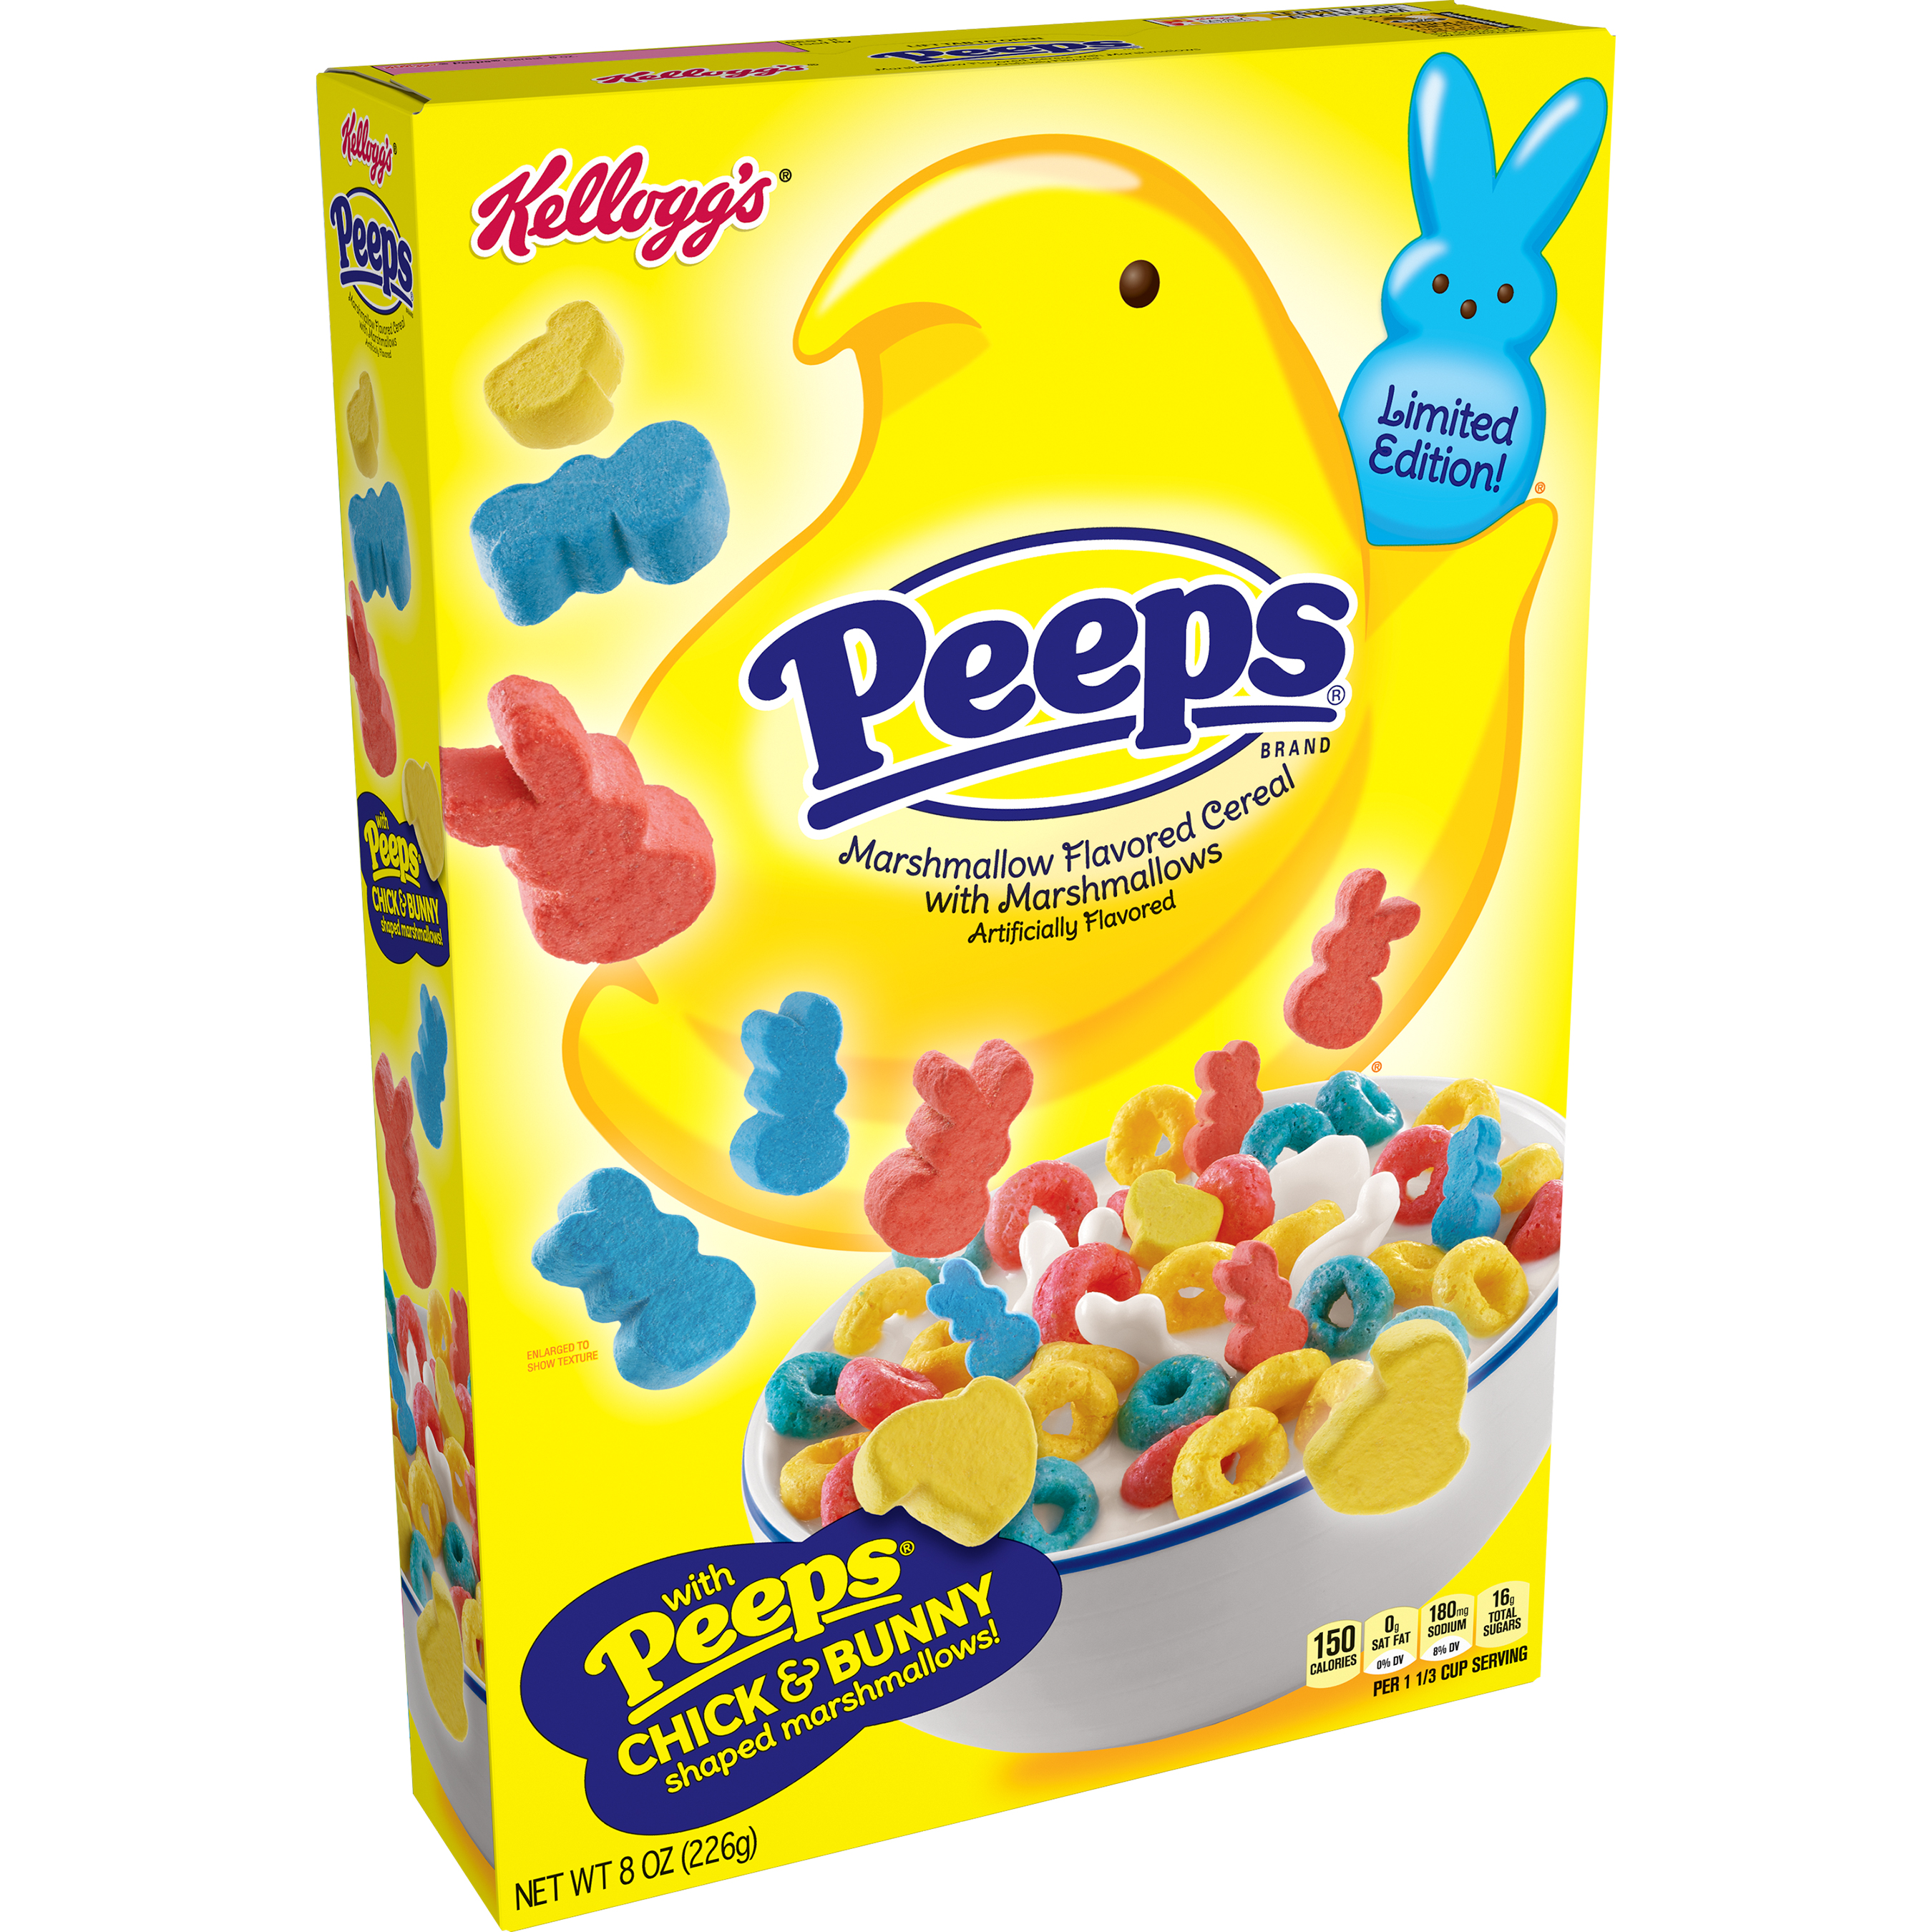 Limited-edition PEEPS® Marshmallow Flavored Cereal with Marshmallows from Kellogg’s is back by popular demand